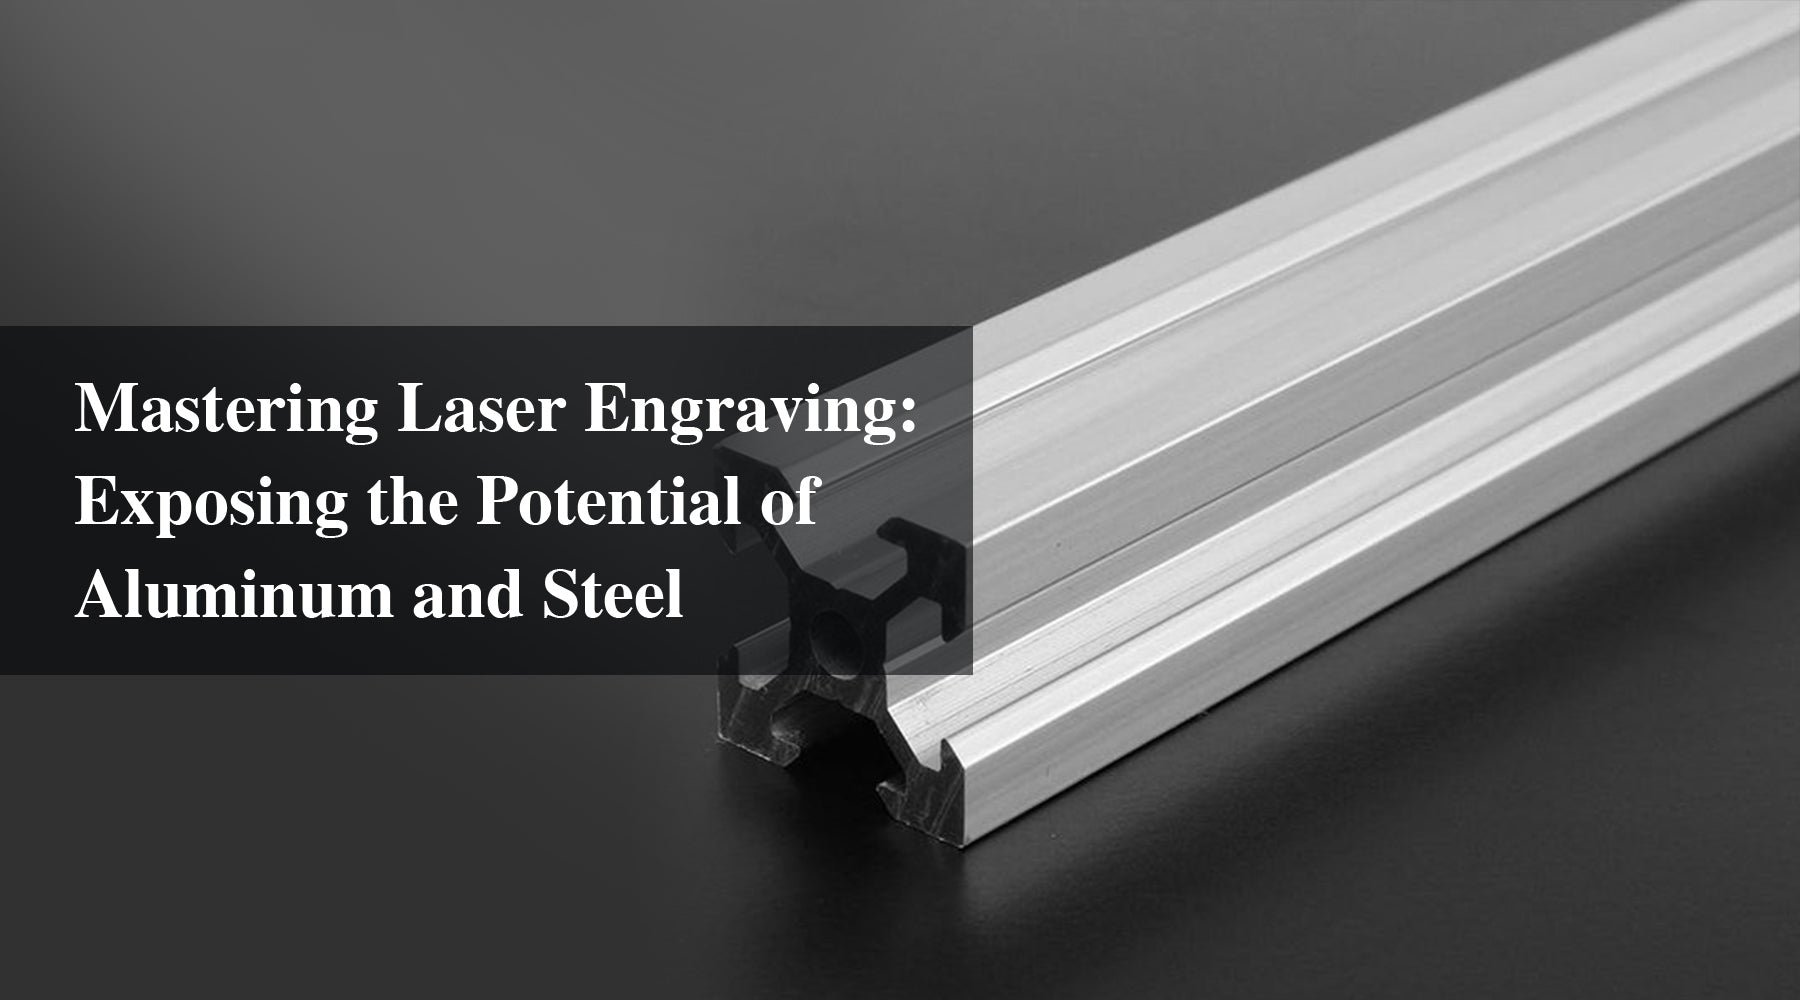 Mastering Laser Engraving: Exposing the Potential of Aluminum and Steel